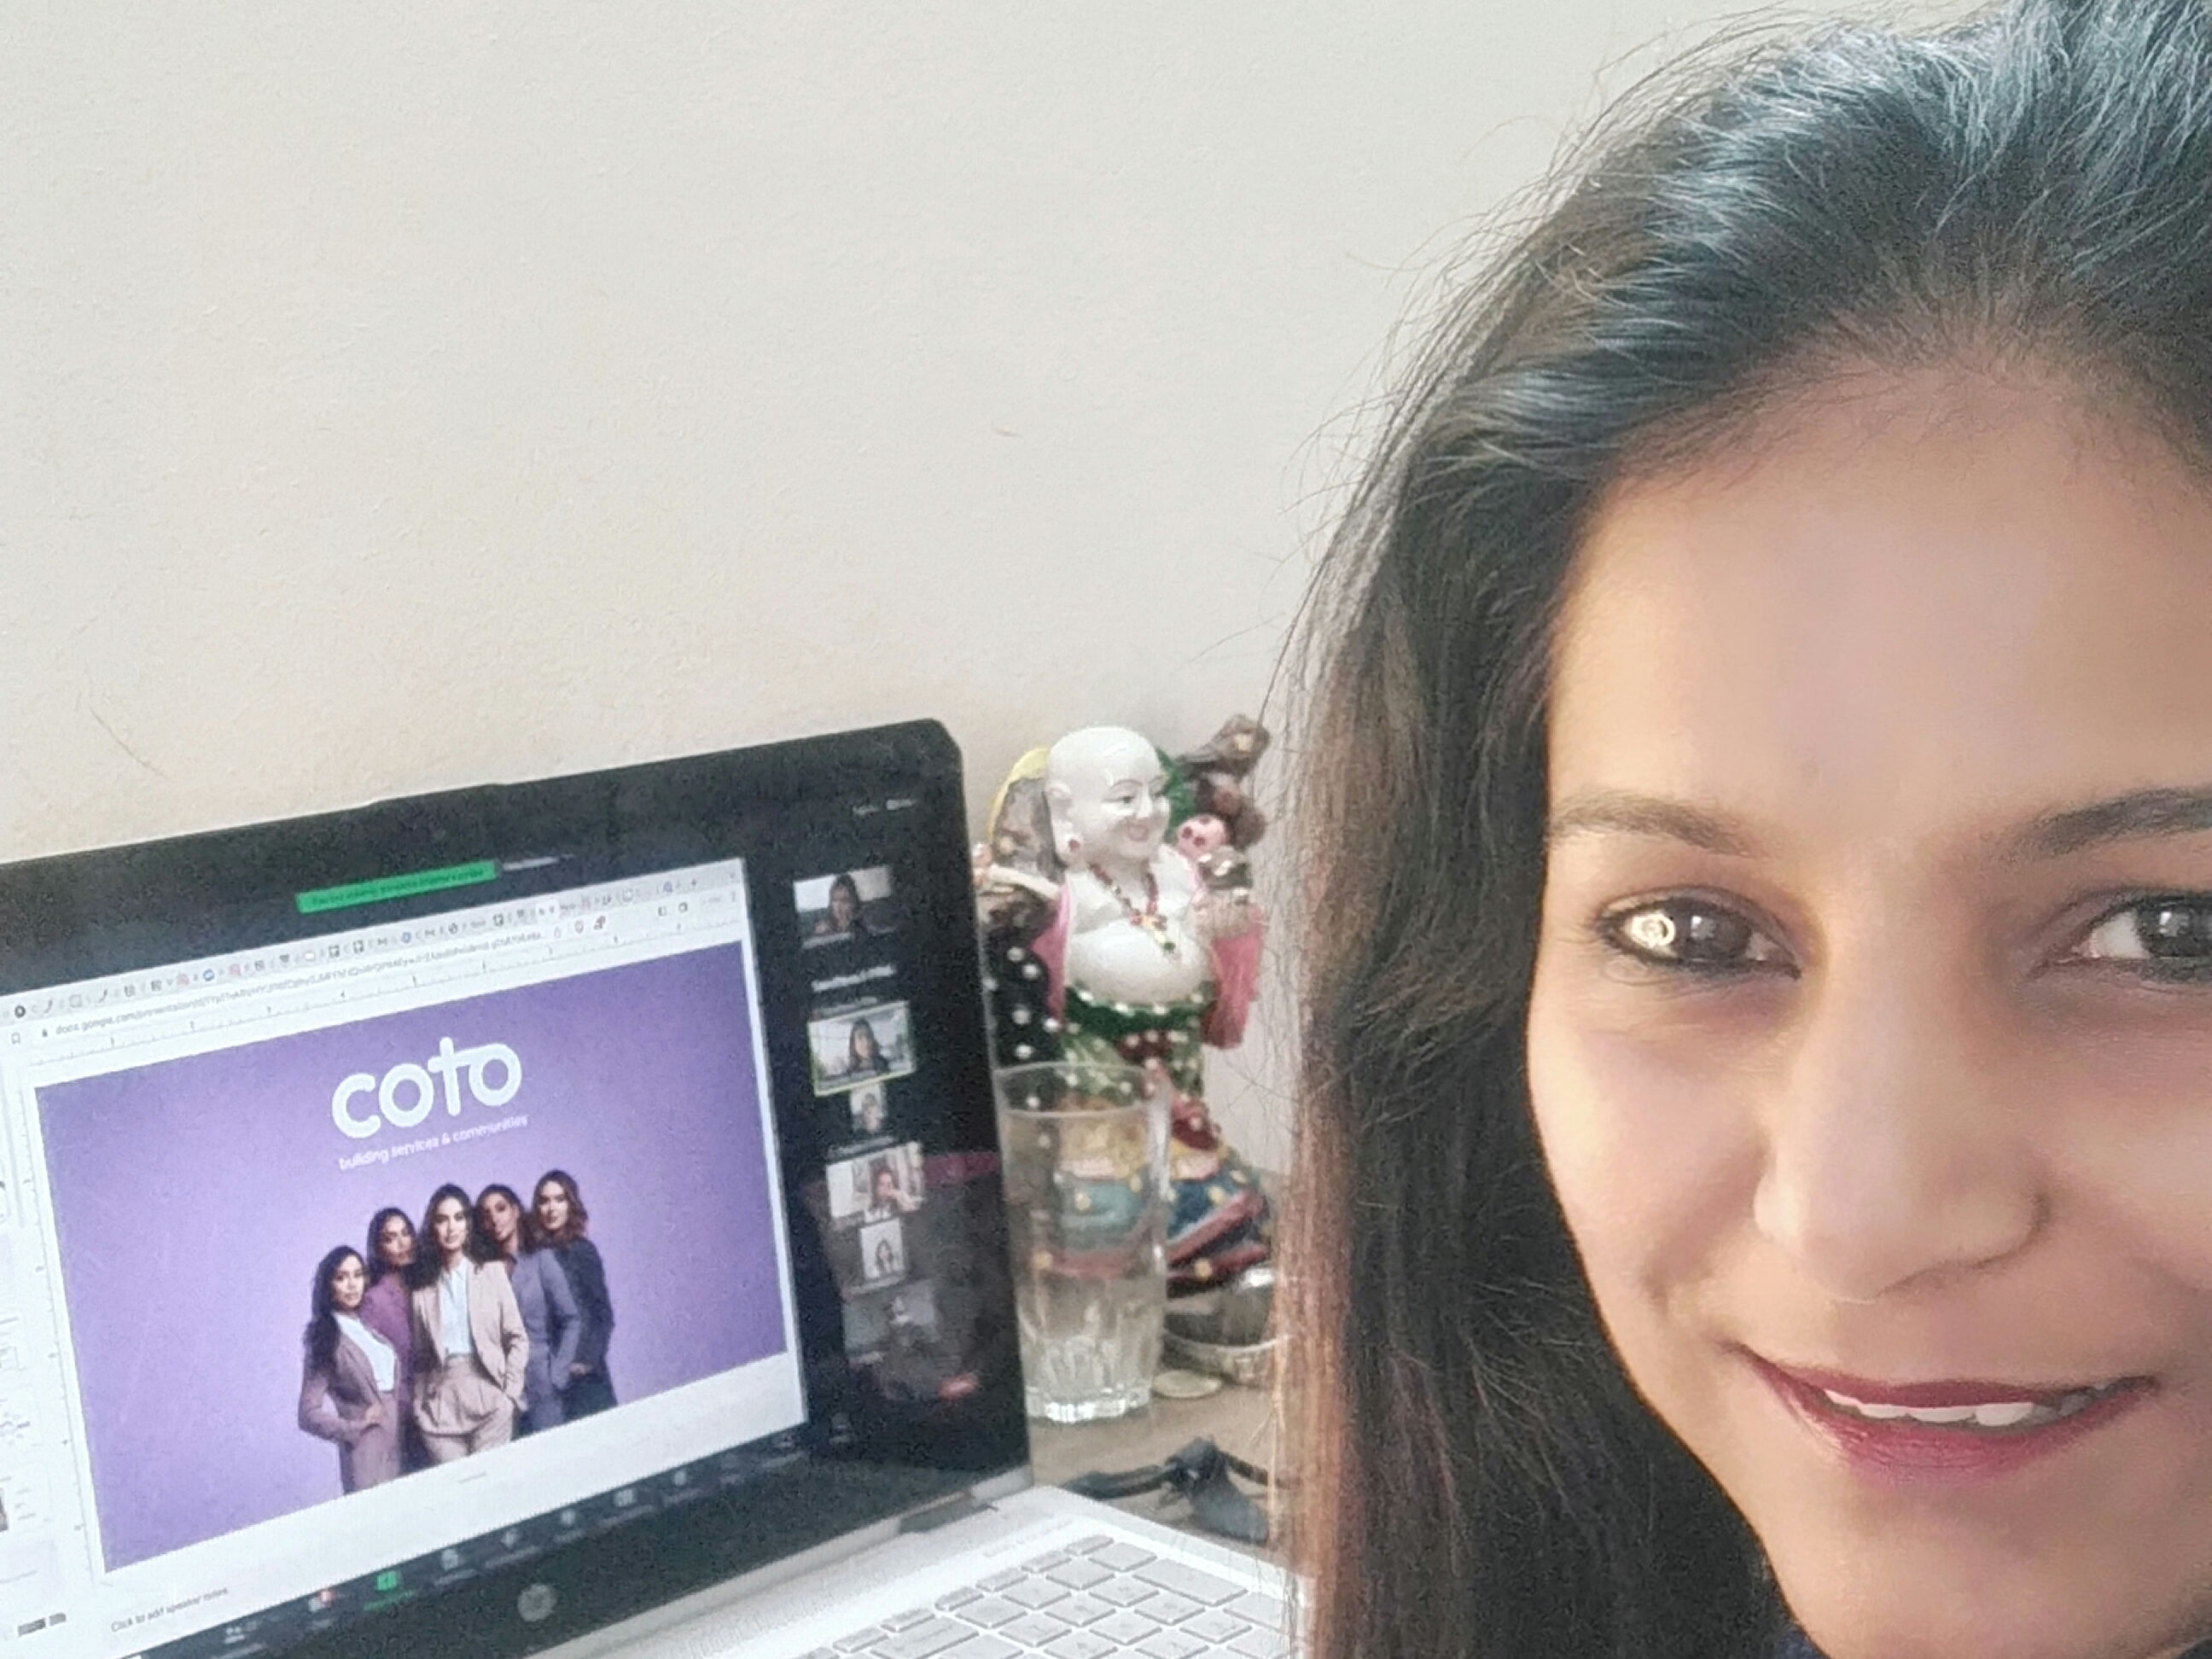 Are you ready to explore the Coto platform as an expert yet? 
I love the thought of making women financially inclusive. 